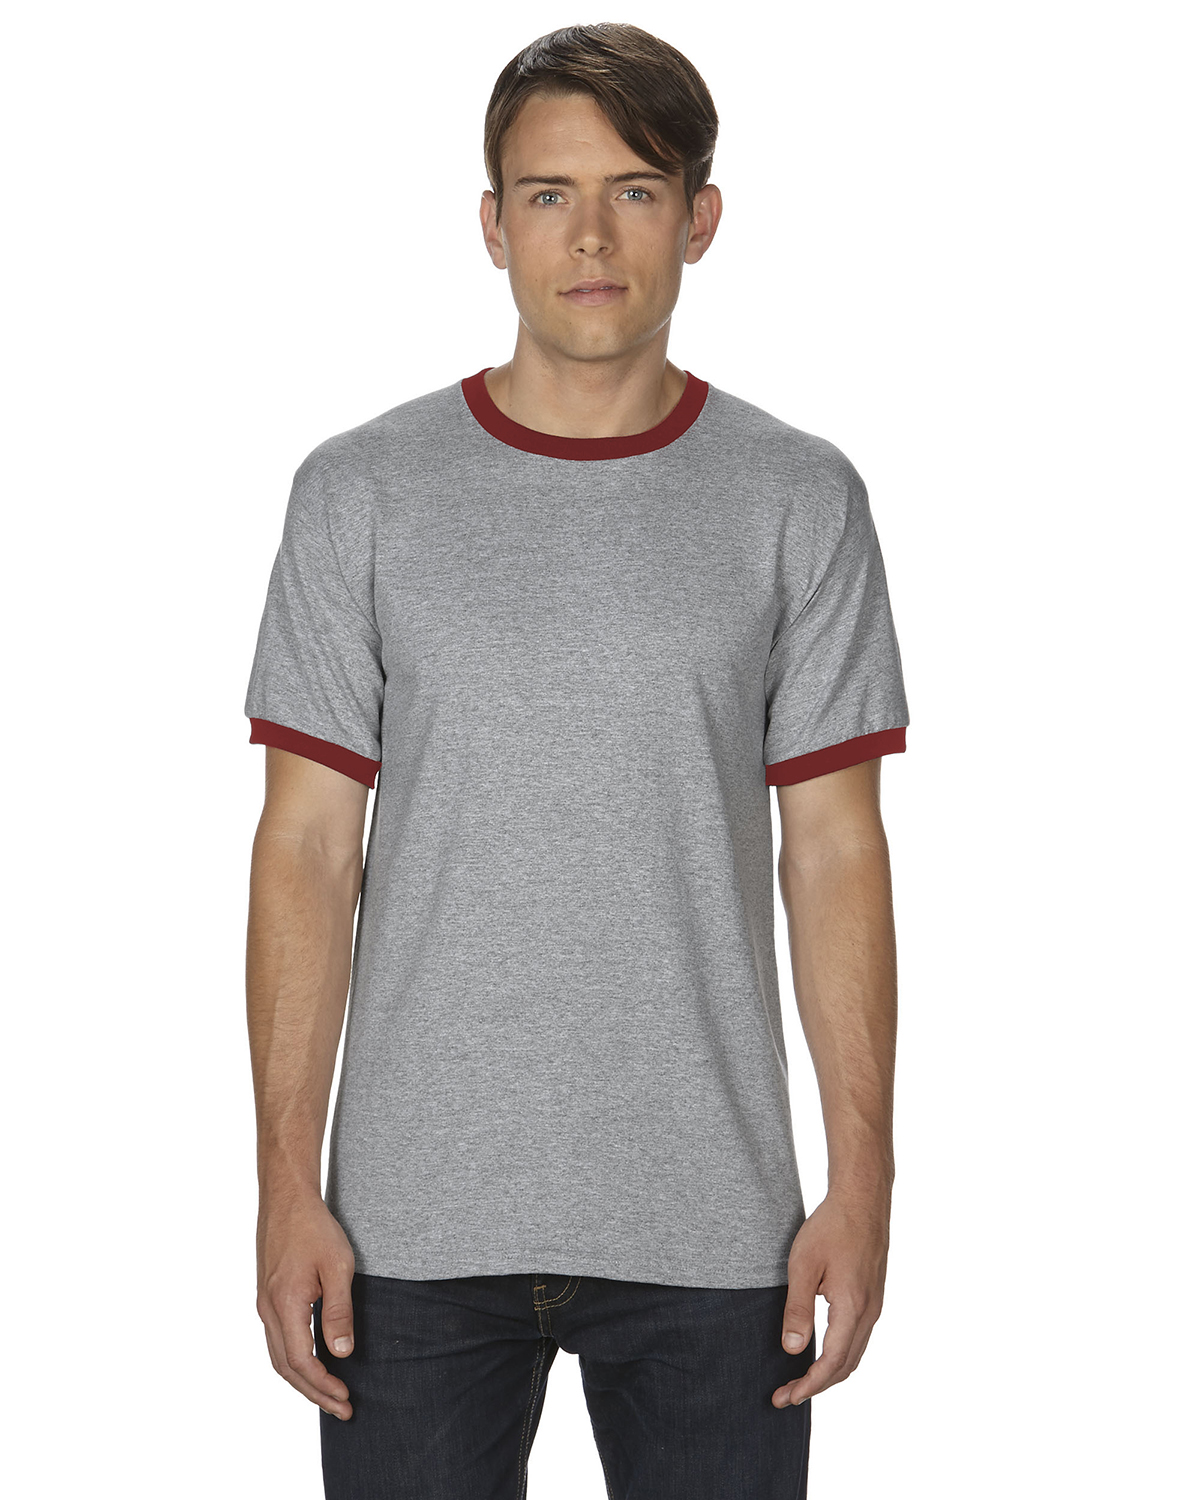 click to view SPORT GREY/RED